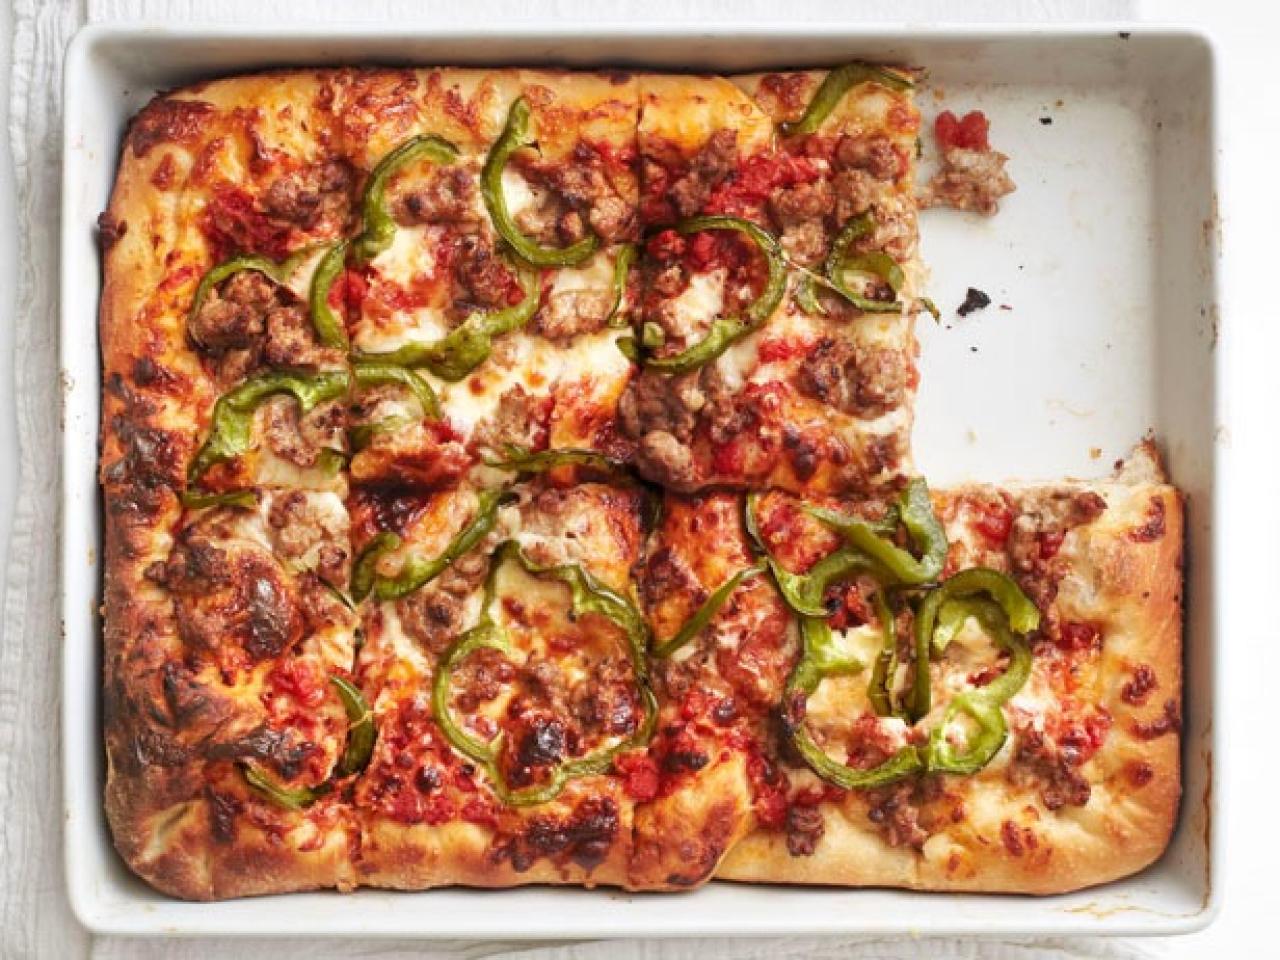 Pizza Cousins' Sicilian Pizza with Italian Hot Sausage, Peppers